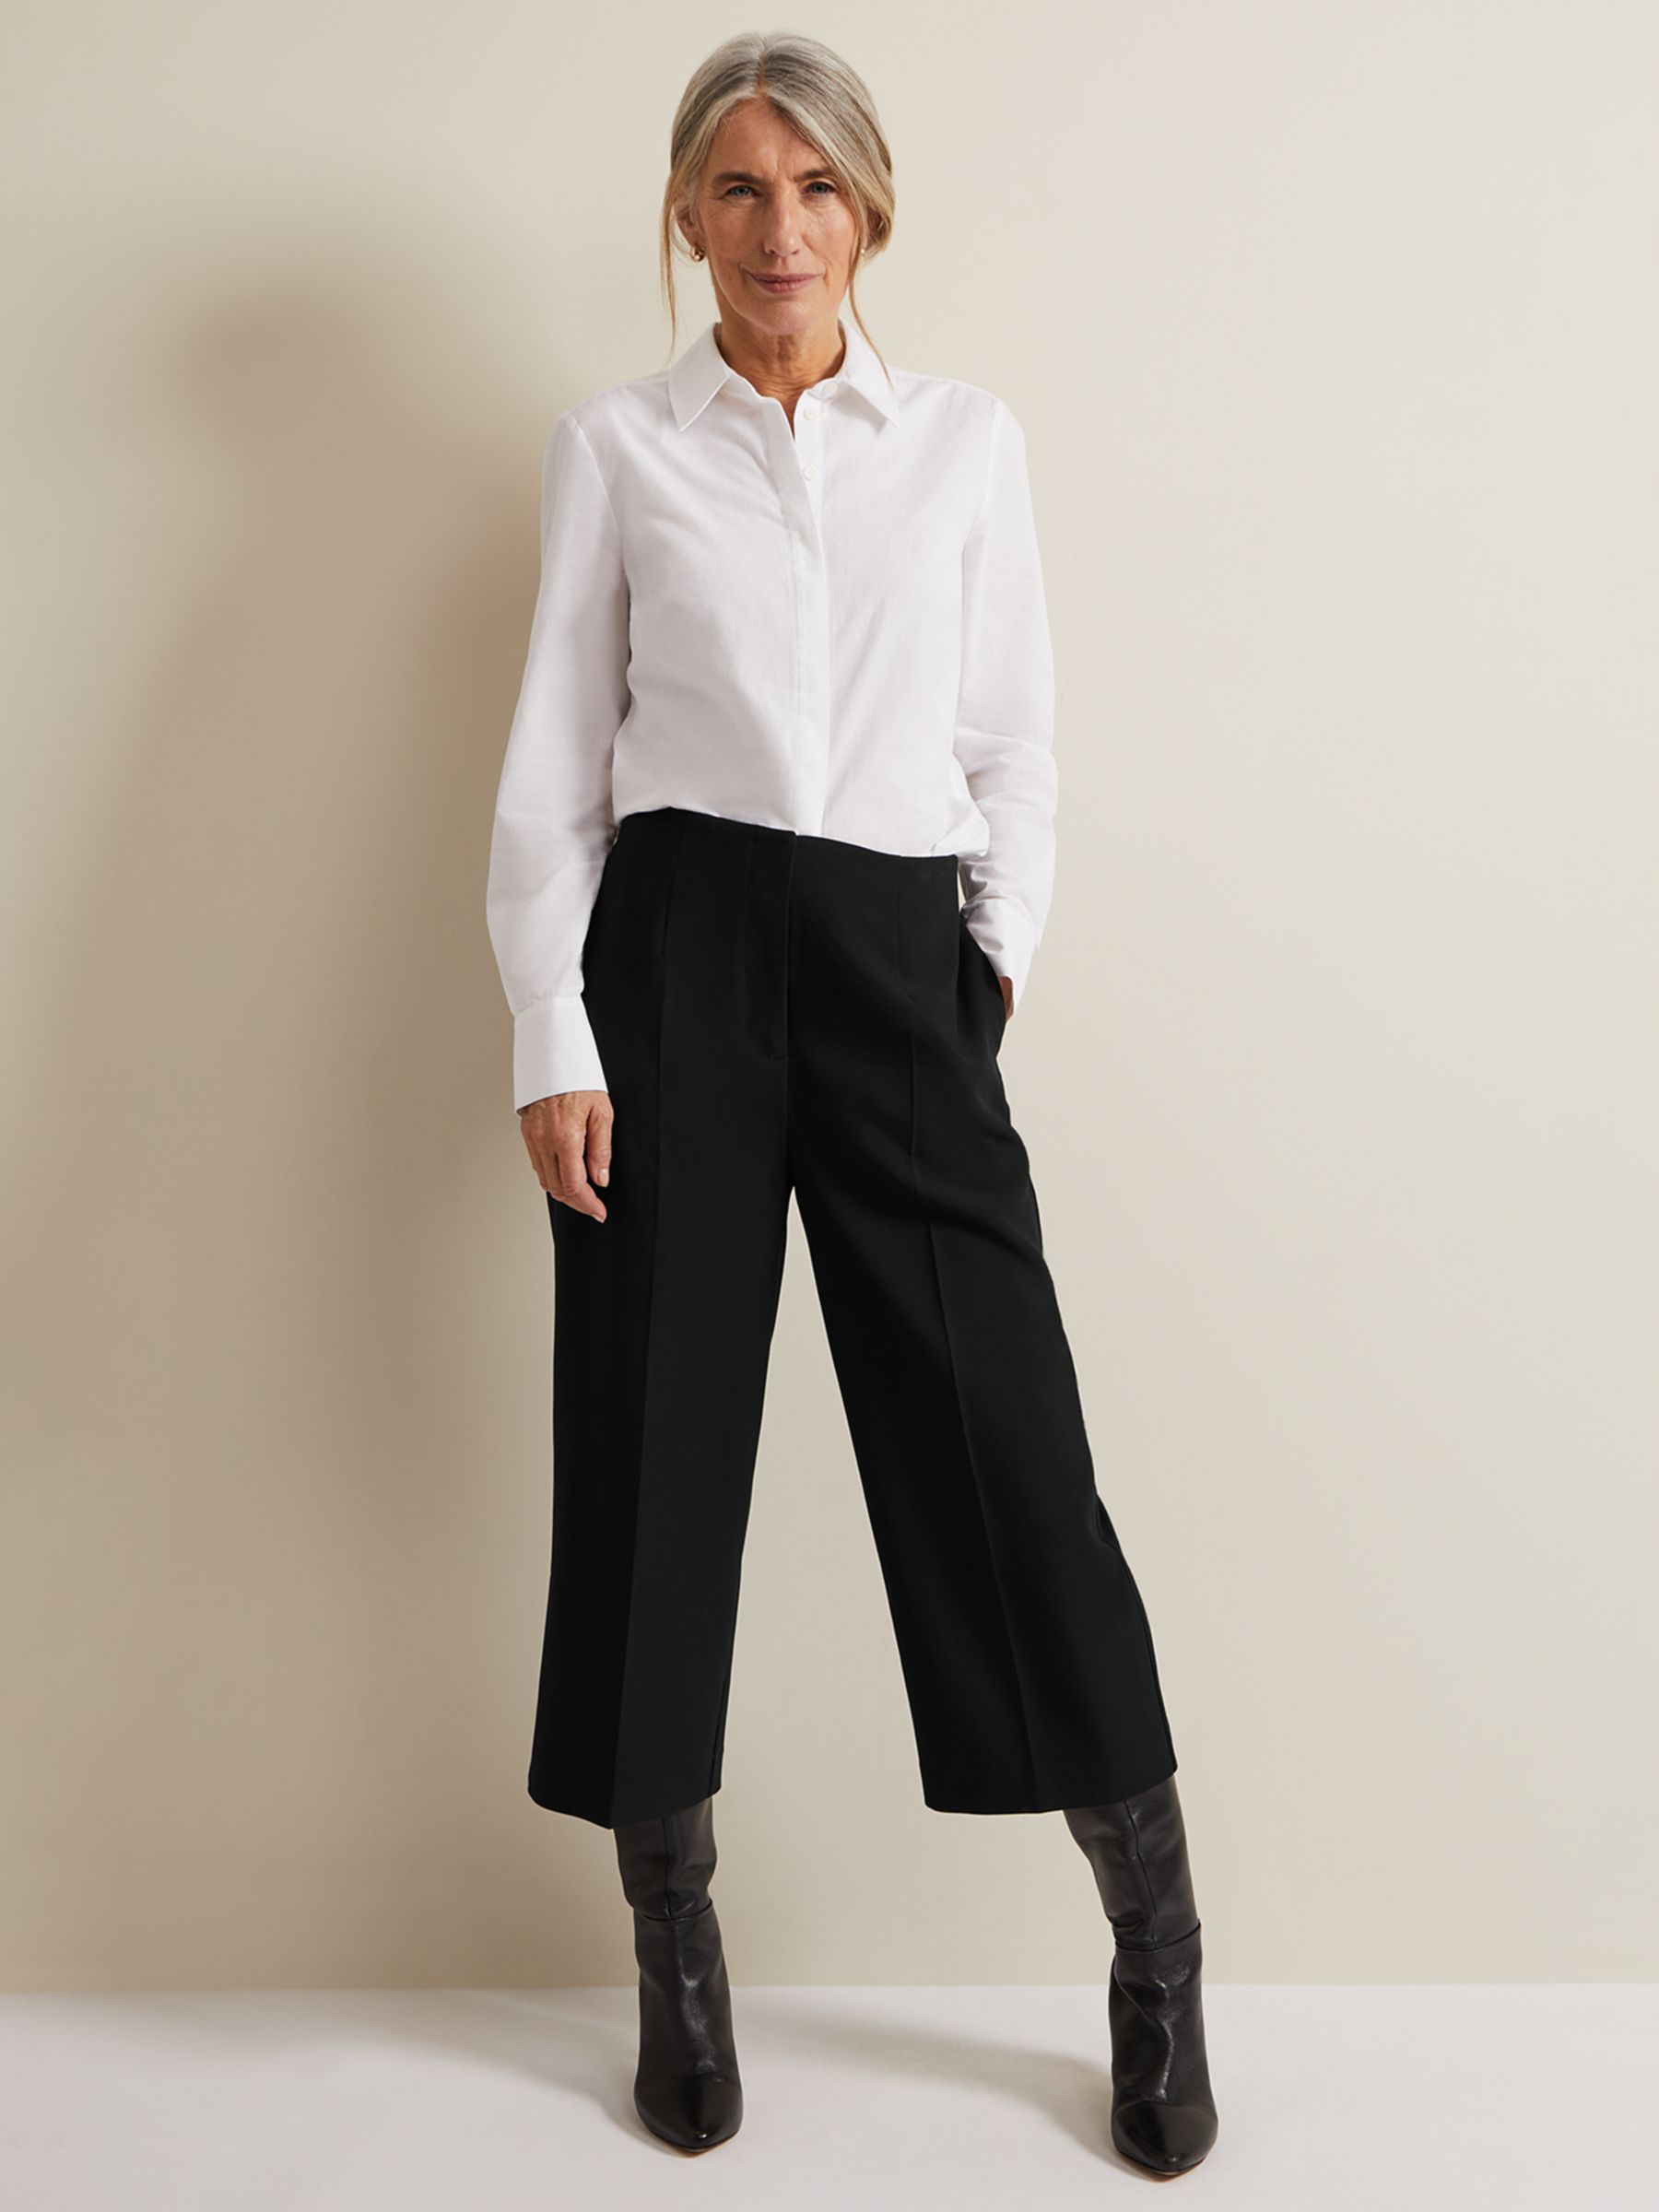 Buy Phase Eight Aubrielle Clean Crepe Culottes Online at johnlewis.com